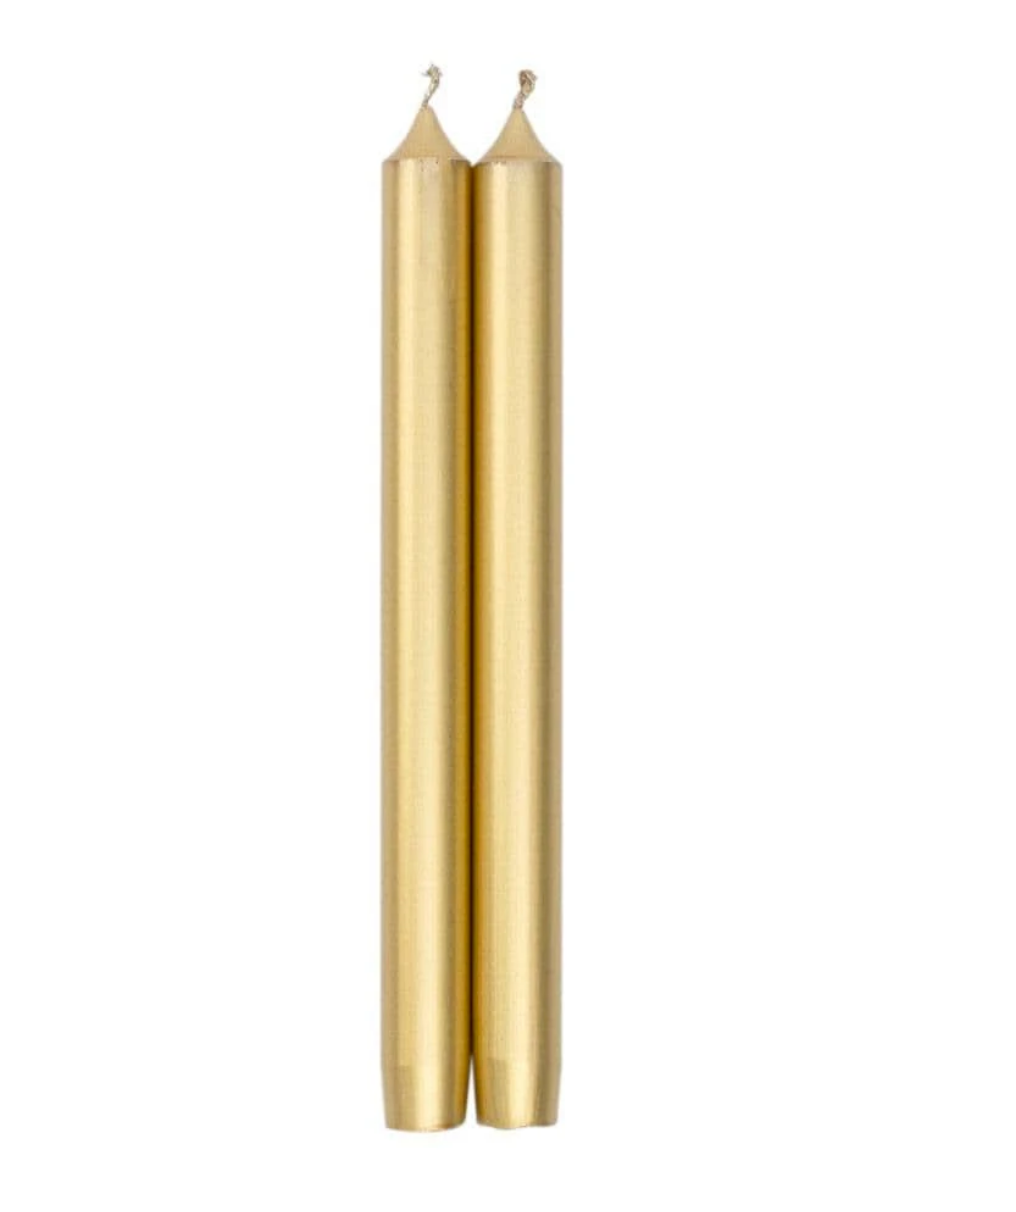 GOLD METALLIC STRAIGHT TAPER CANDLES